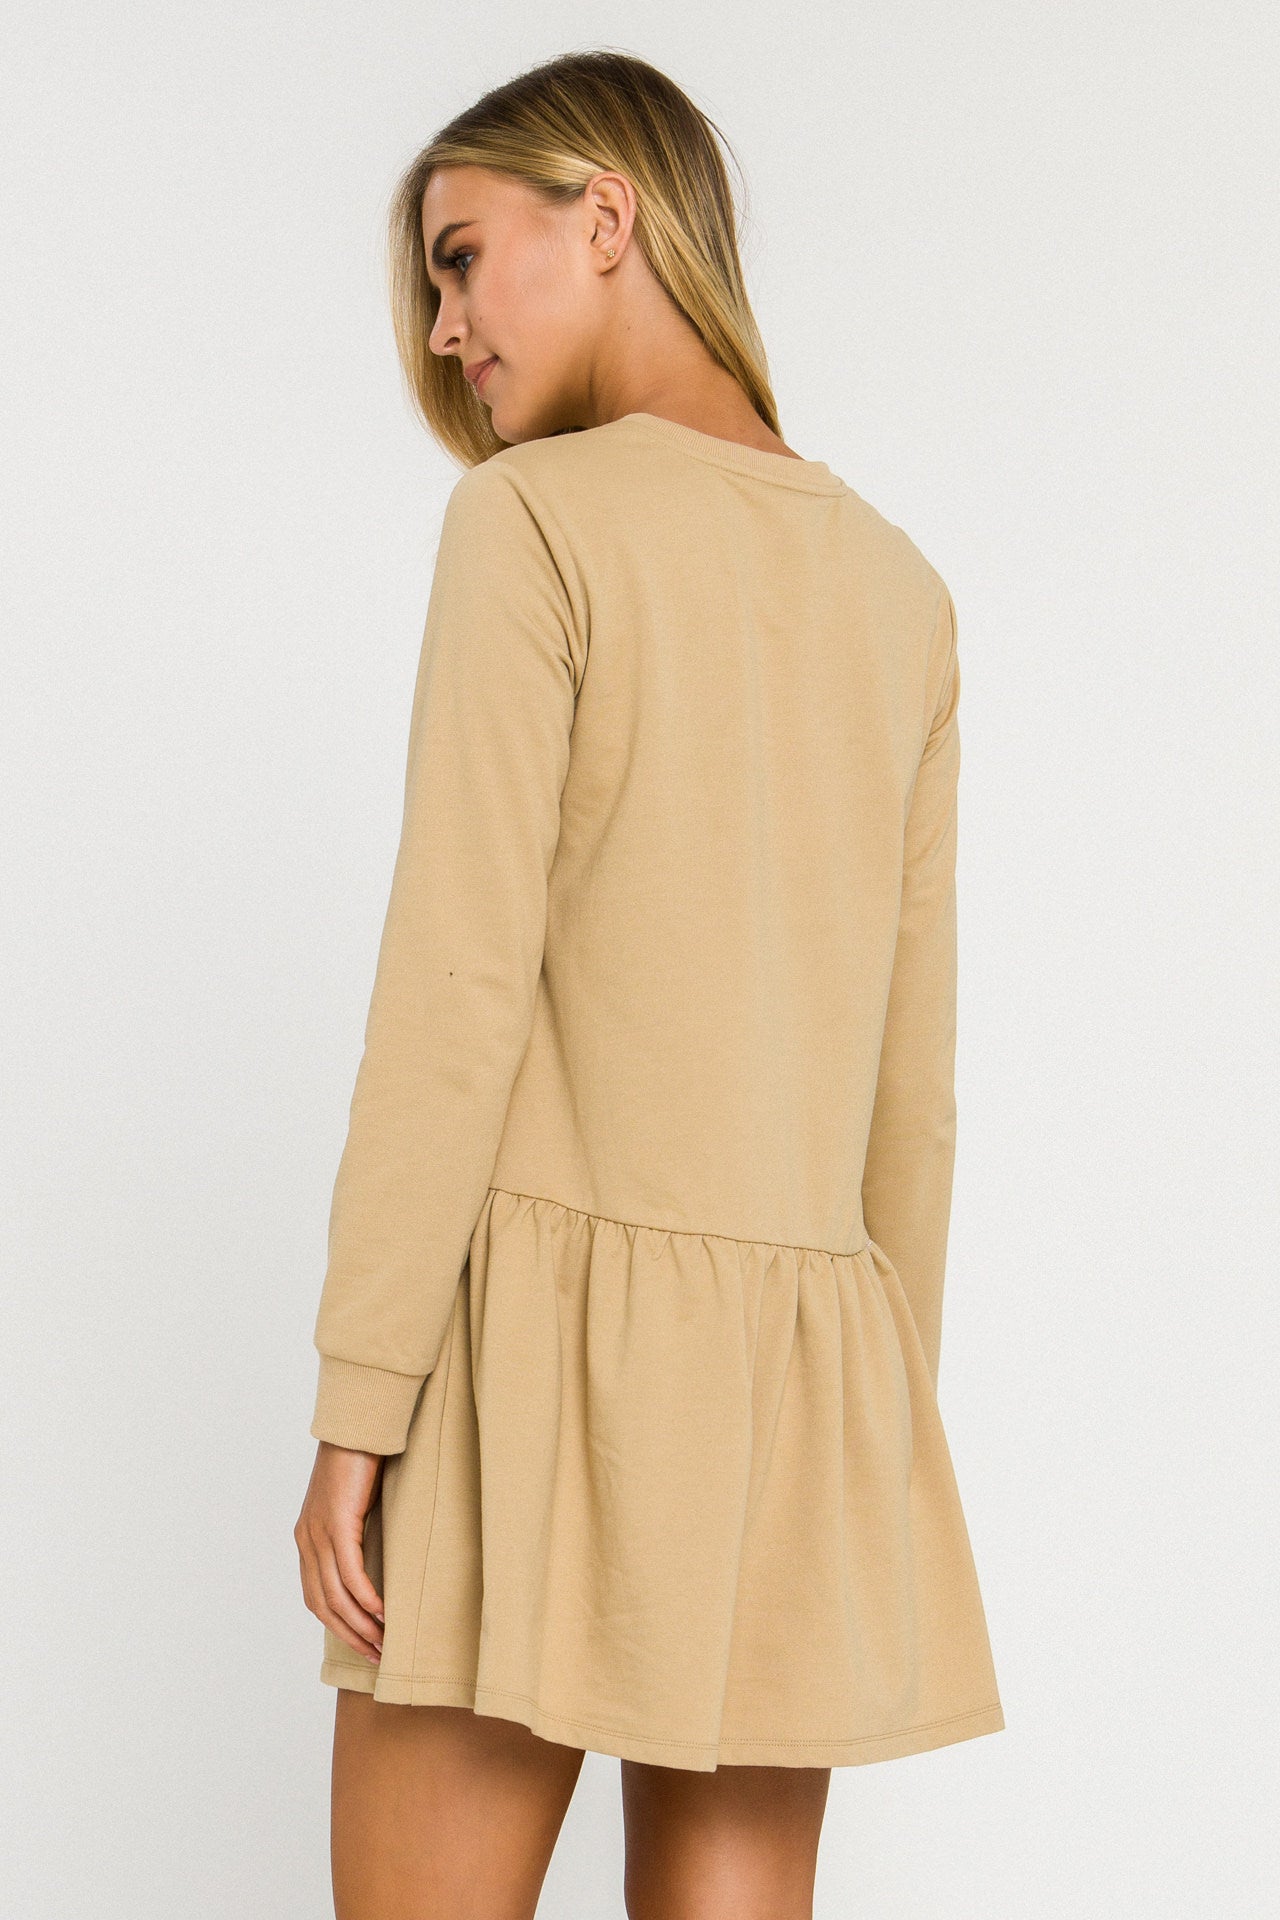 ENGLISH FACTORY - Knit Unbalanced Seam Dress - DRESSES available at Objectrare